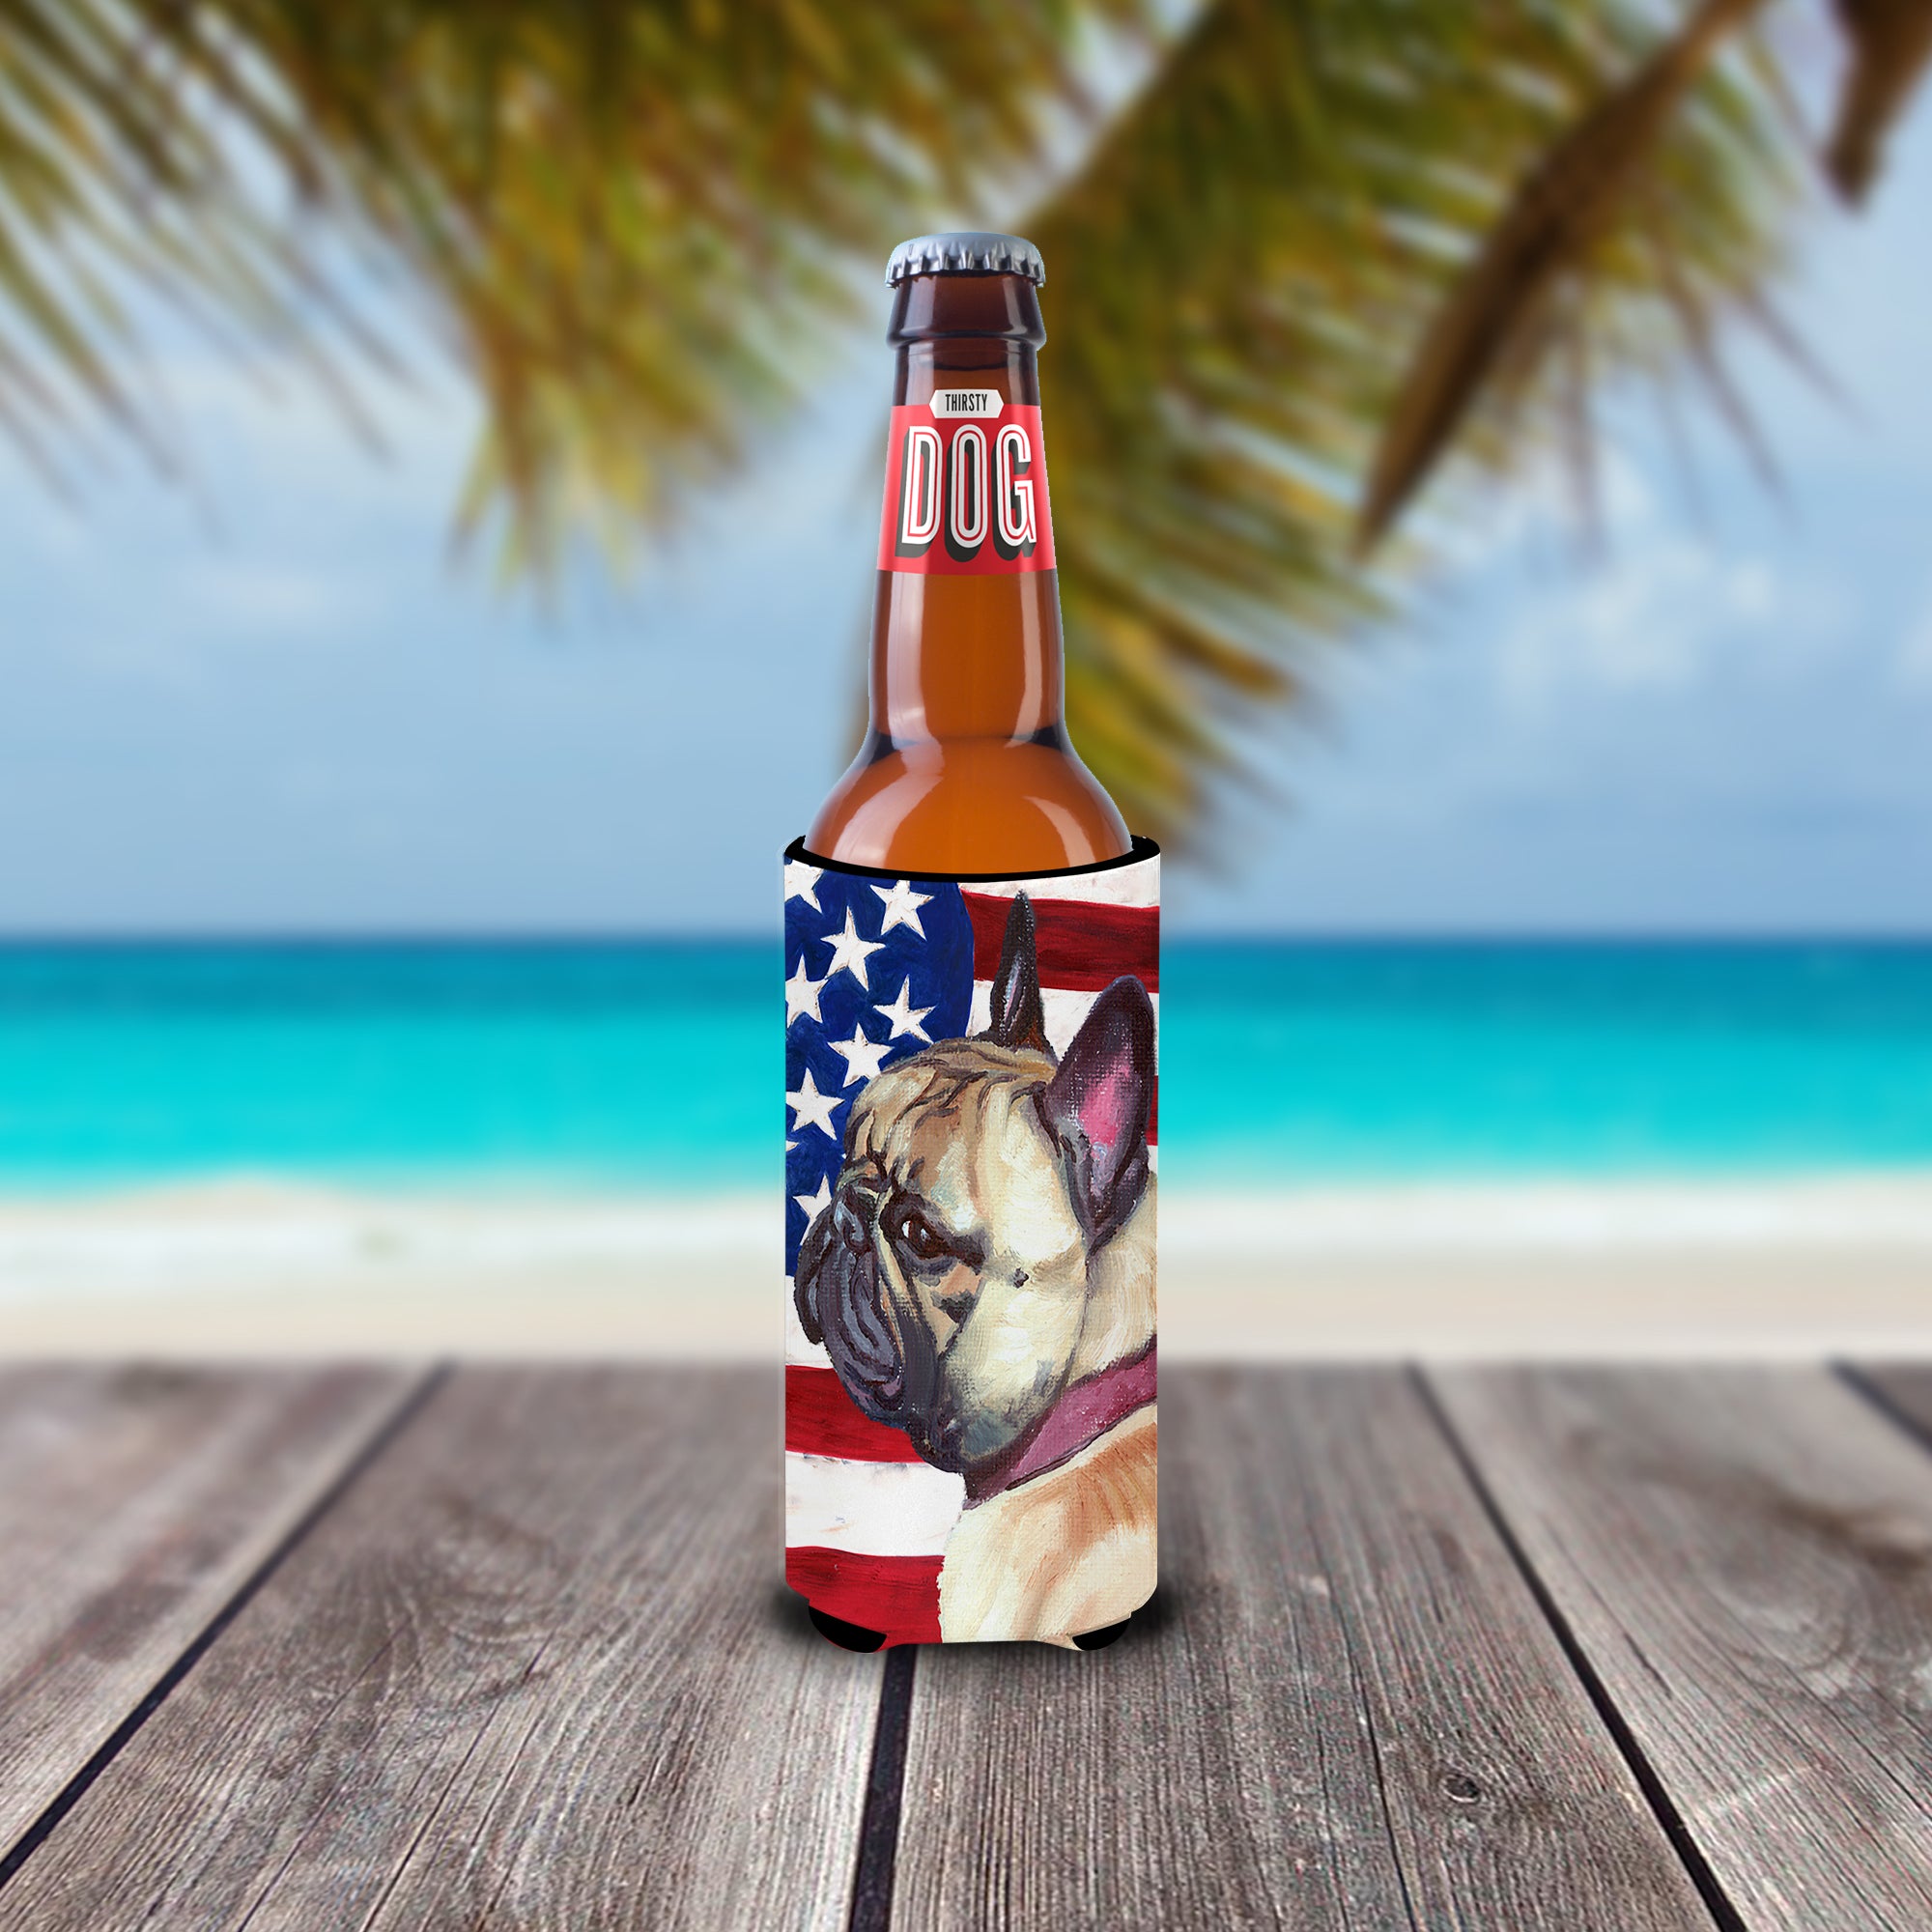 French Bulldog Frenchie USA Patriotic American Flag Ultra Beverage Insulators for slim cans LH9545MUK  the-store.com.